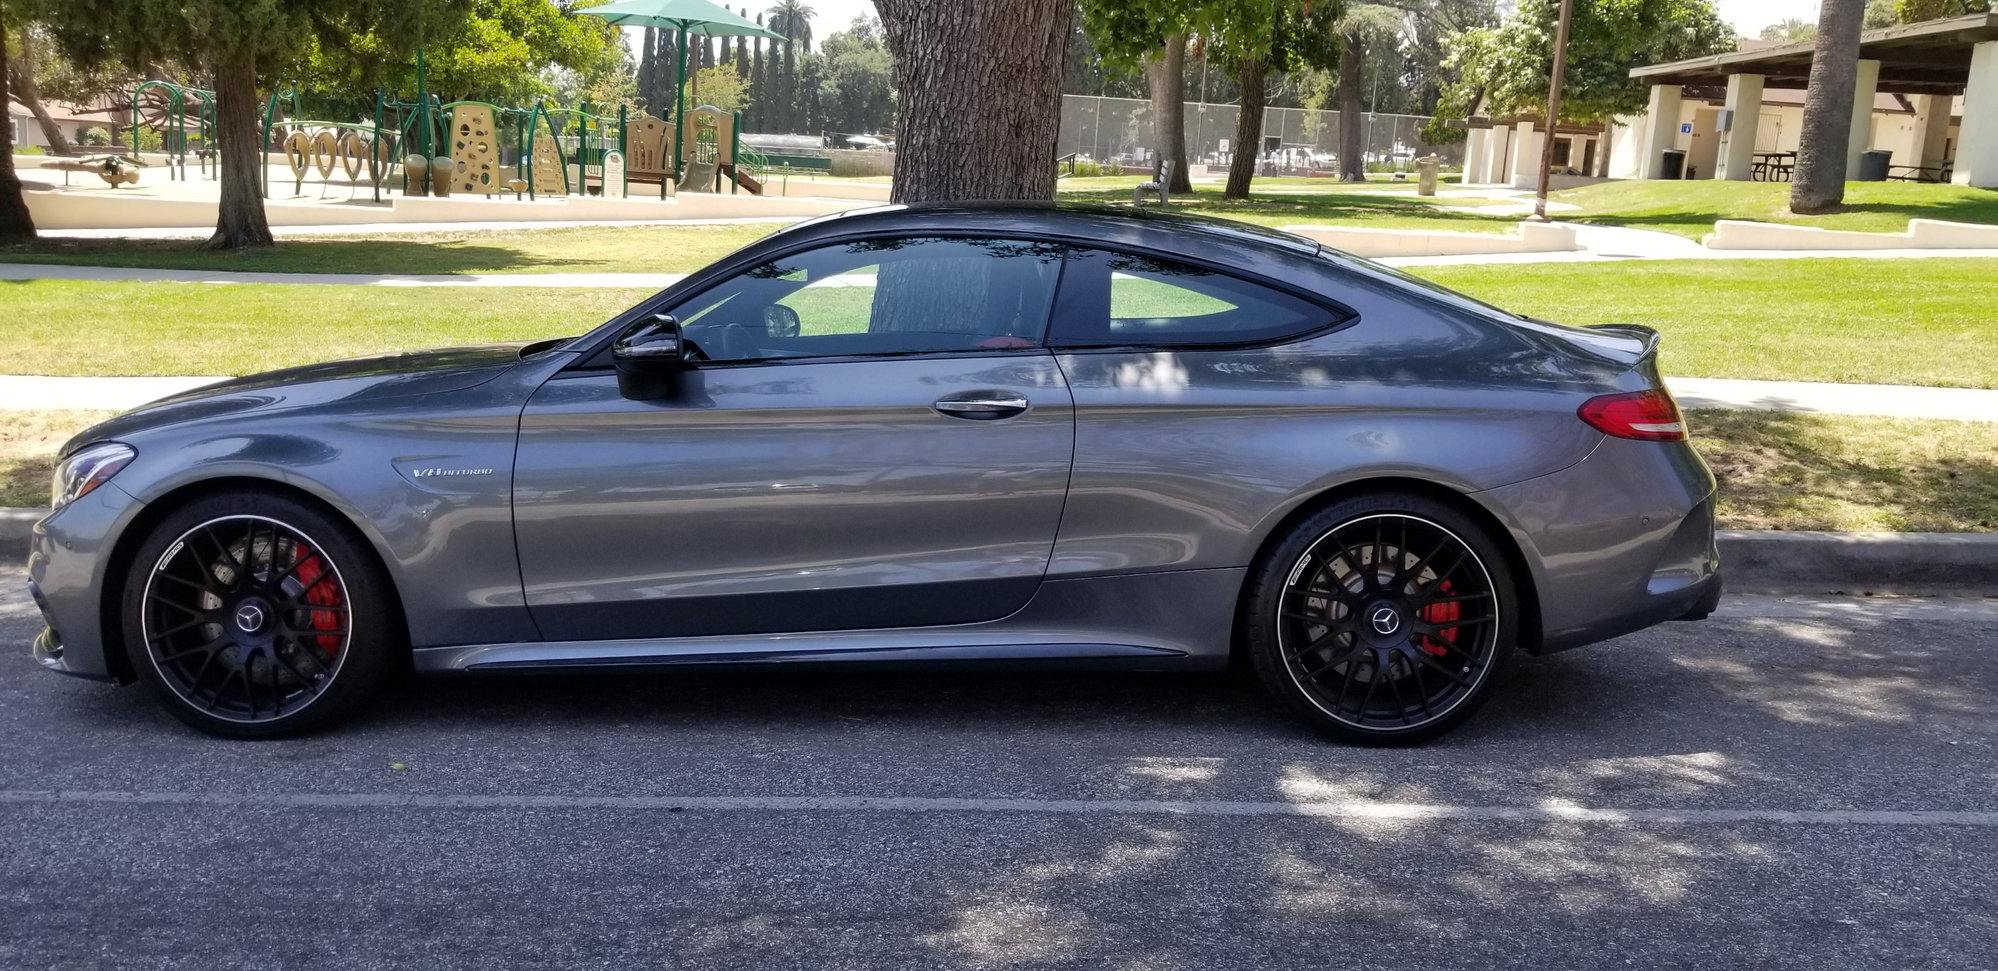 17 C63s Coupe For Sale Mbworld Org Forums